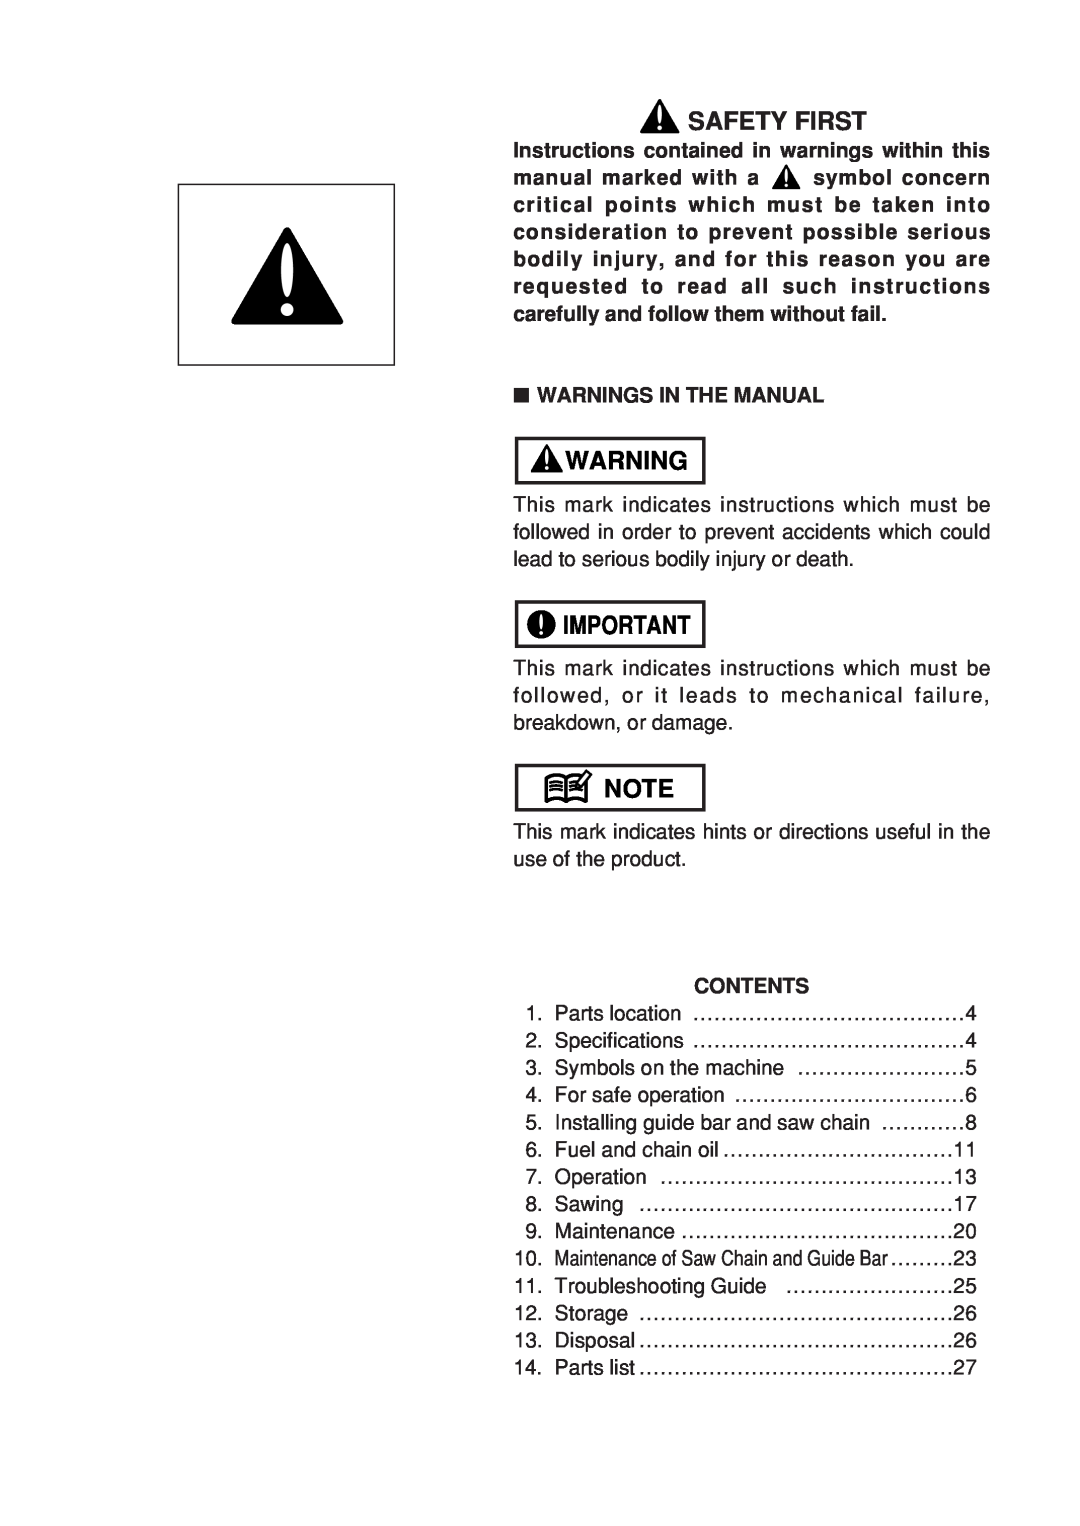 Zenoah G3200 manual Safety First, Instructions contained in warnings within this, Warnings In The Manual, Contents 